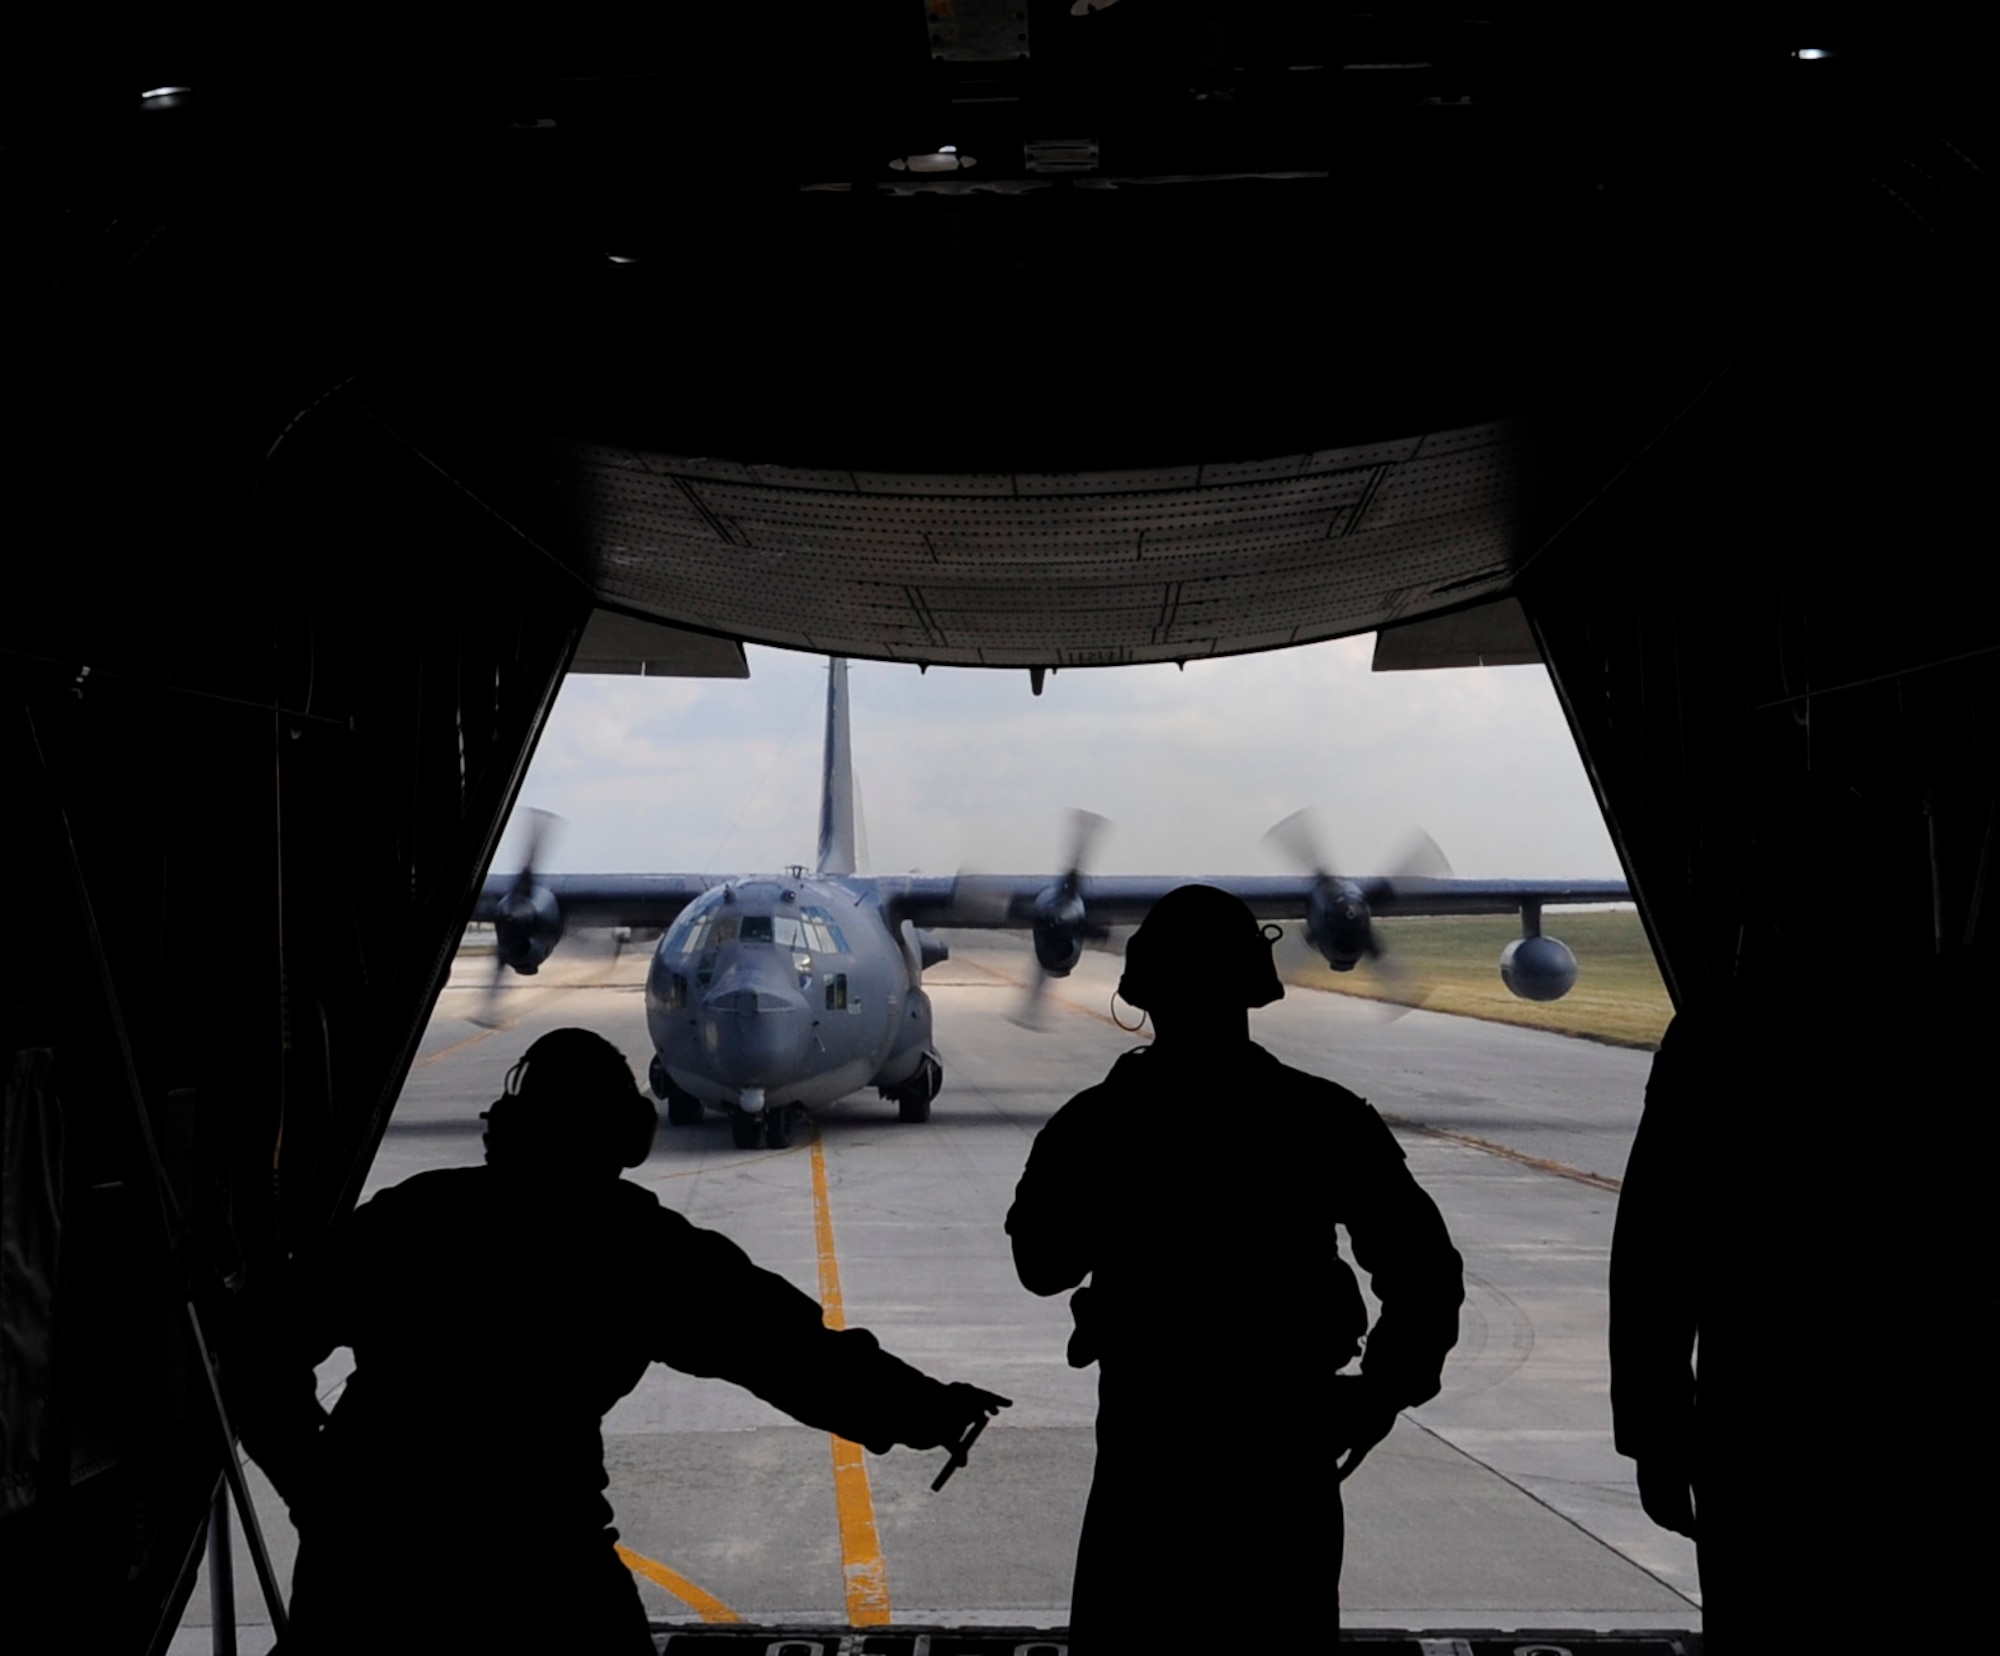 Loadmasters from the 17th Special Operations Squadron monitor an MC-130P Combat Shadow during taxi into a parking spot in sequence with three other MC-130P Combat Shadow aircraft on the flight line of Kadena Air Base, Japan, Oct. 16, 2014. The MC-130P Combat Shadow crew consists of two pilots, two navigators, a flight engineer, a communications systems operator and two loadmasters. (U.S. Air Force photo by Airman 1st Class Keith James)